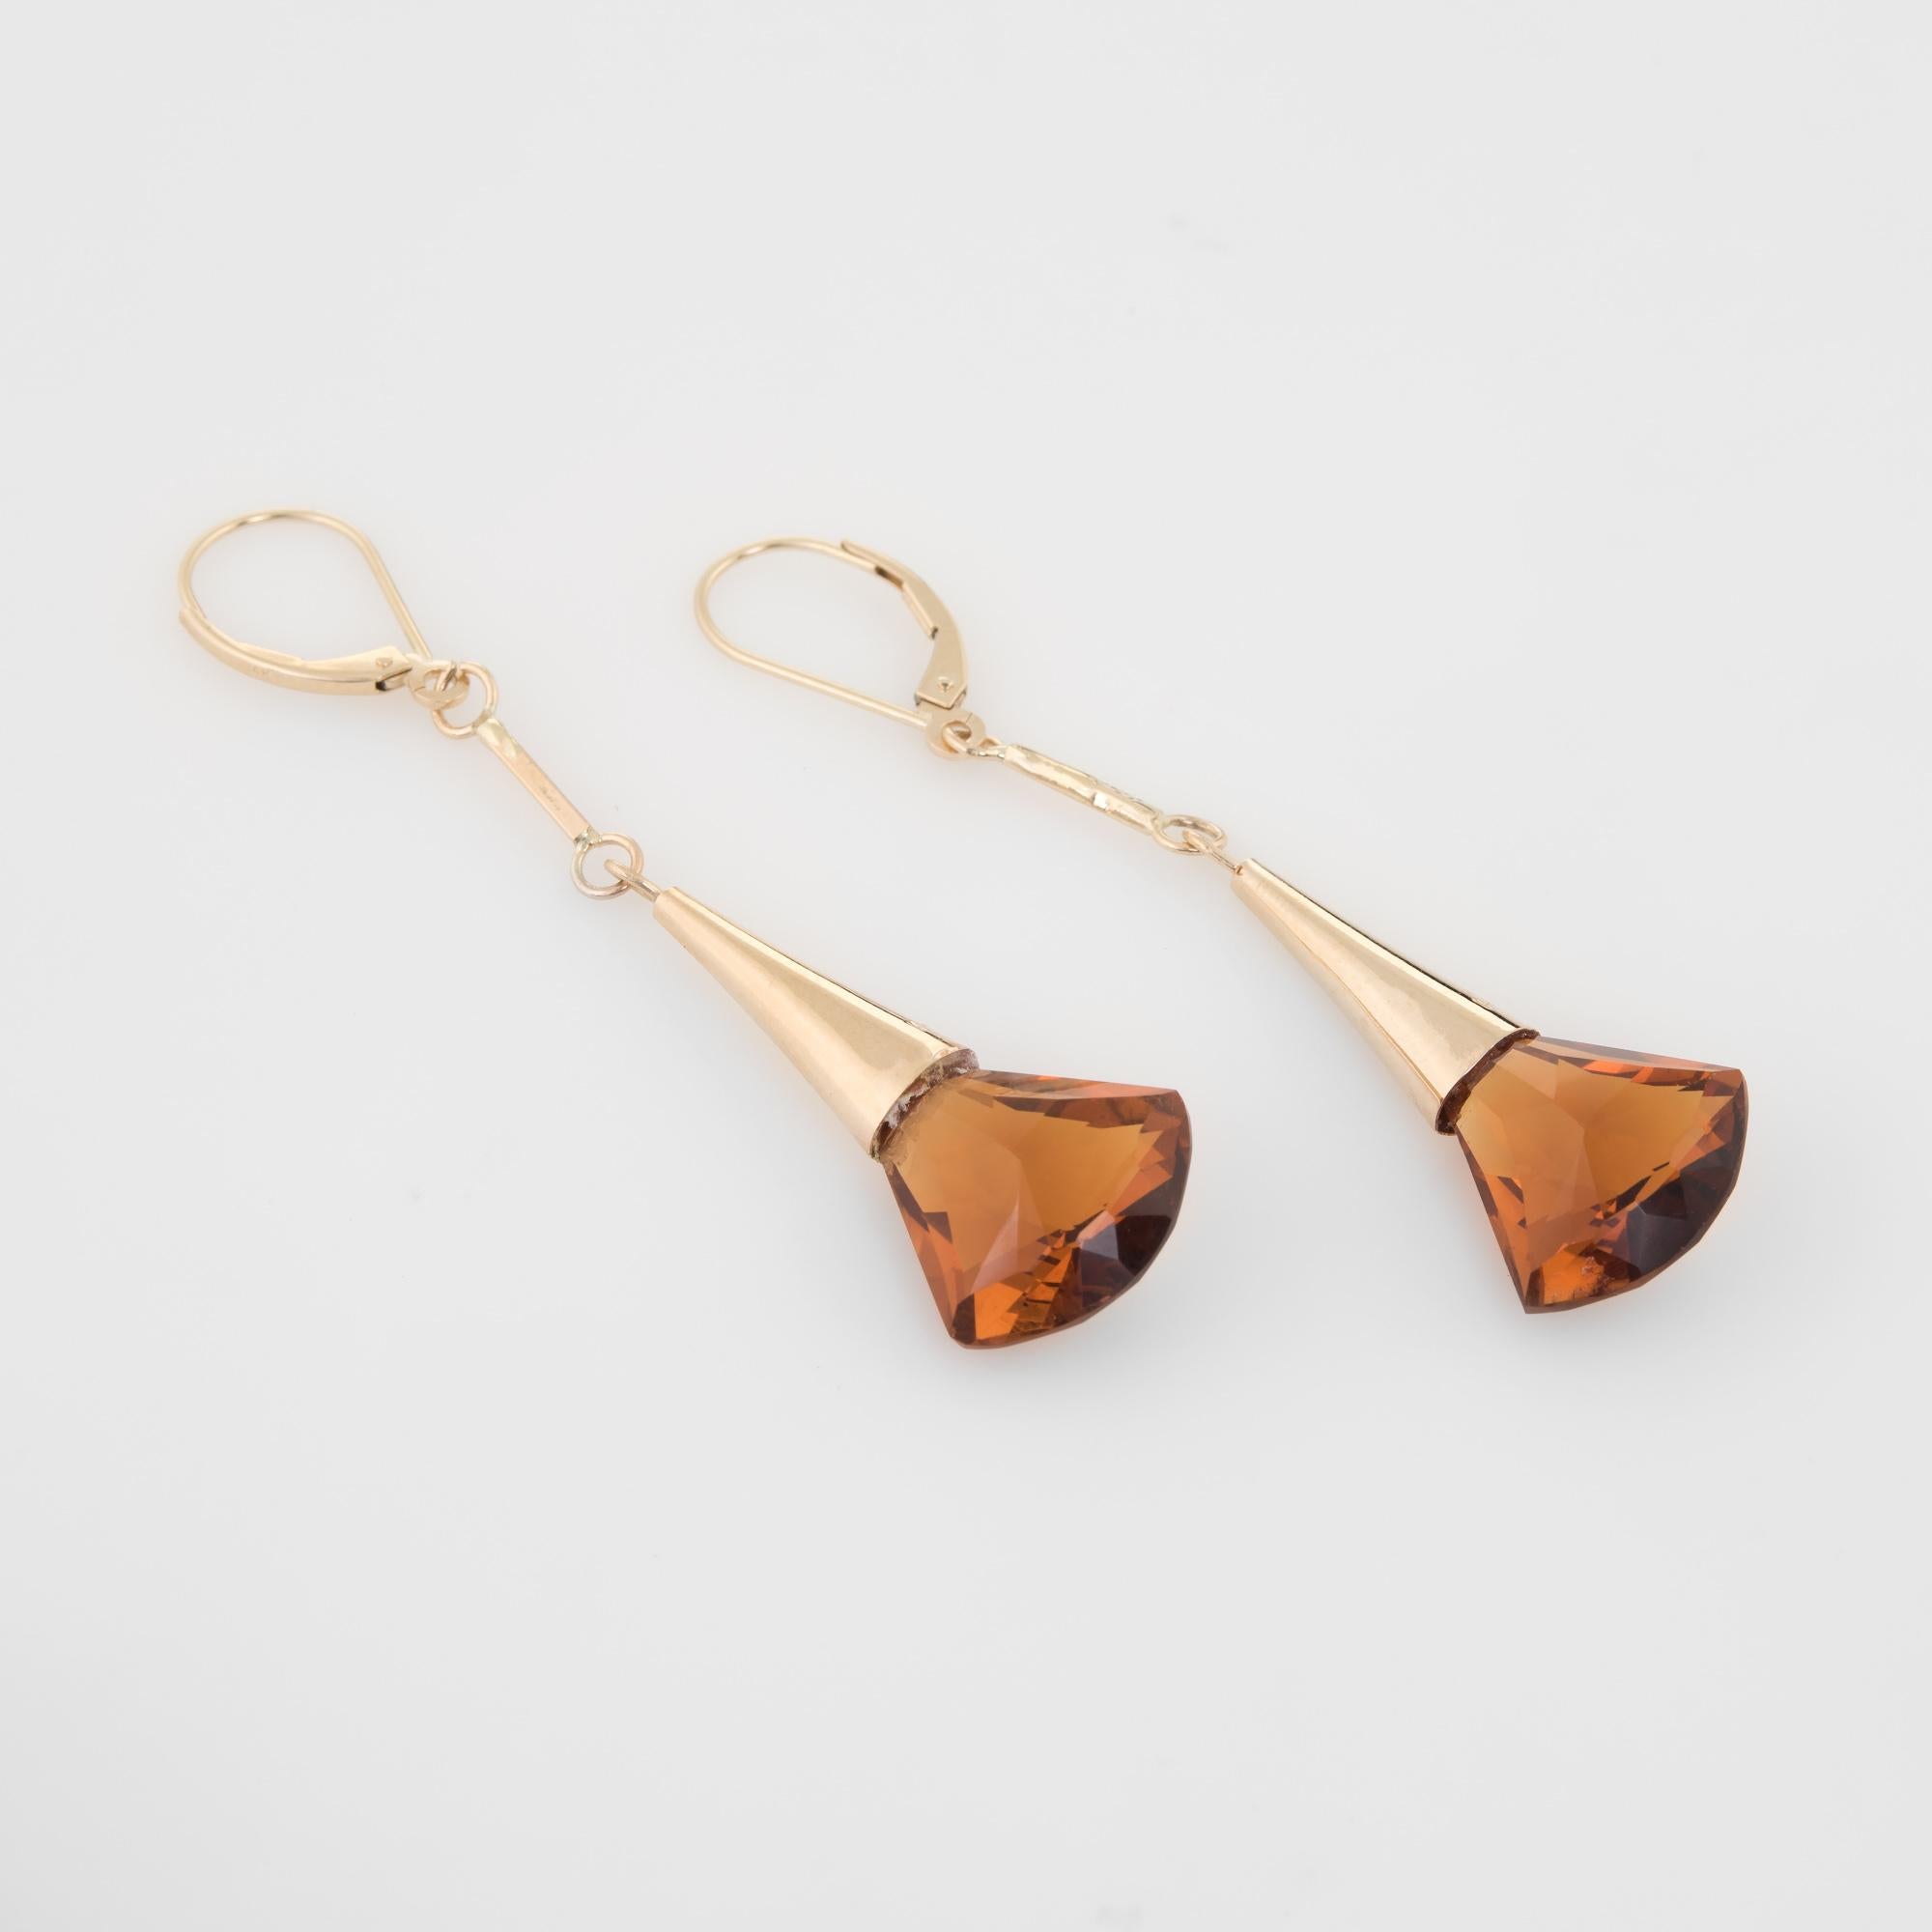 Finely detailed pair of vintage citrine drop earrings, crafted in 14k yellow gold. 

Two citrines measure 13mm x 15mm. The citrines are in excellent condition and free of cracks or chips.  

The charming earrings are set with citrines that offer a